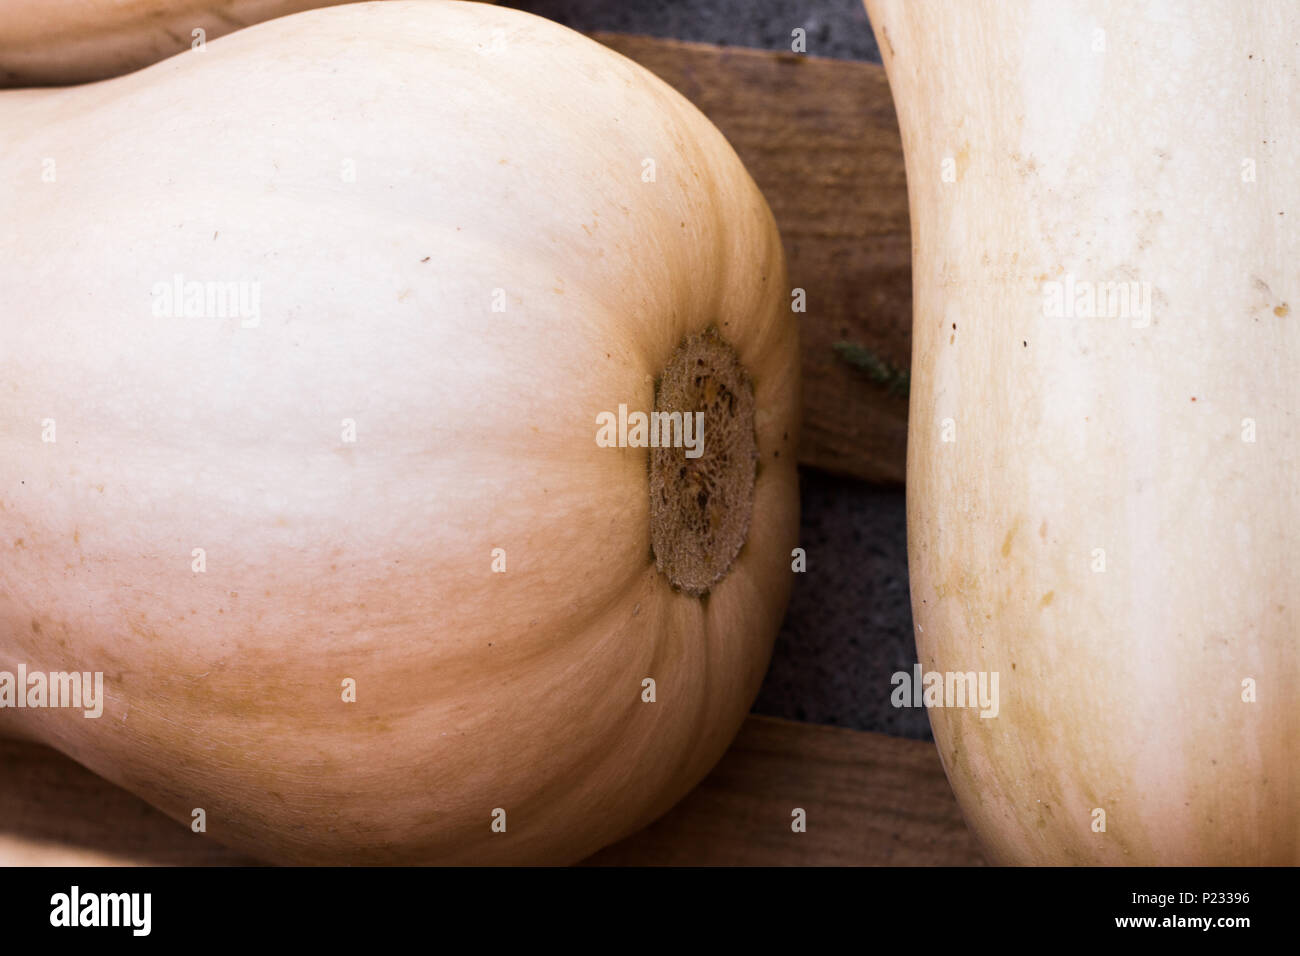 Close up detail of Butternut squash in a rustic wooden crate. Stock Photo